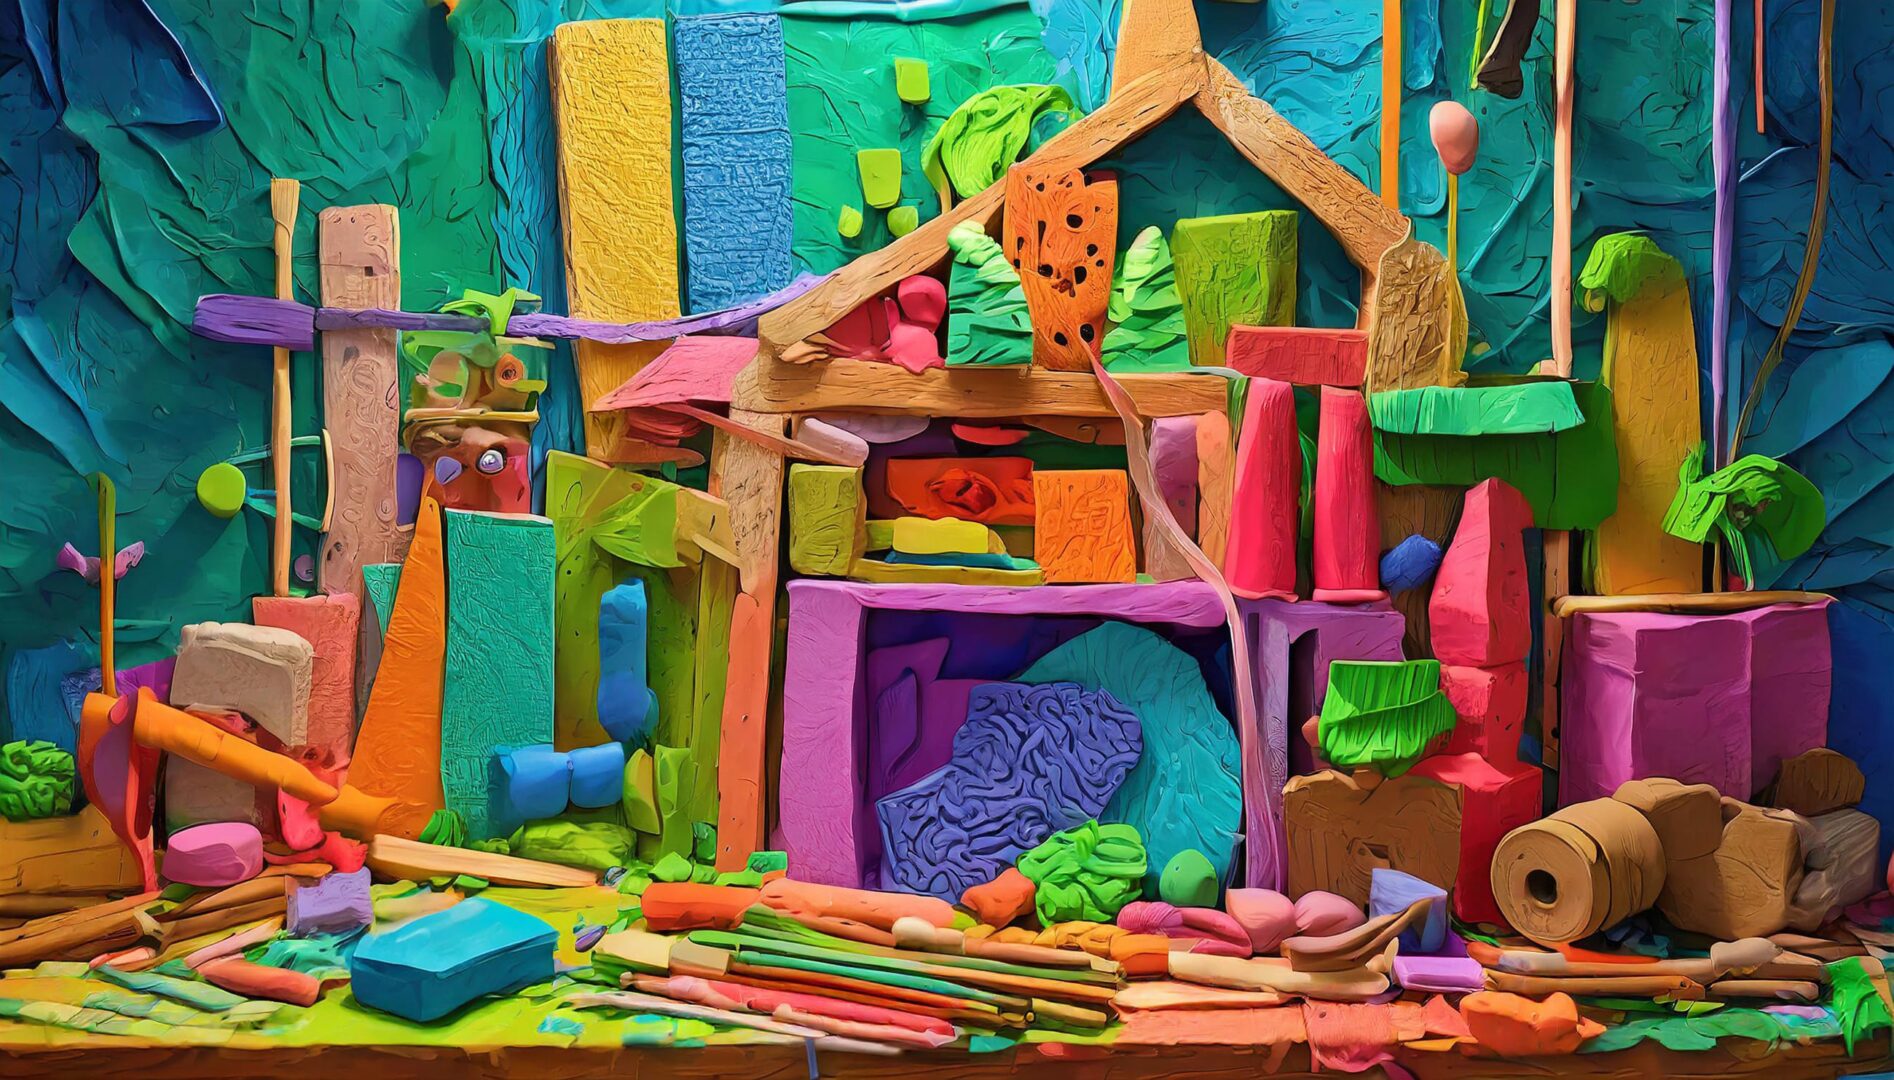 a colorful image of materials and shapes covering a table surface with house forms, plants, and animals.